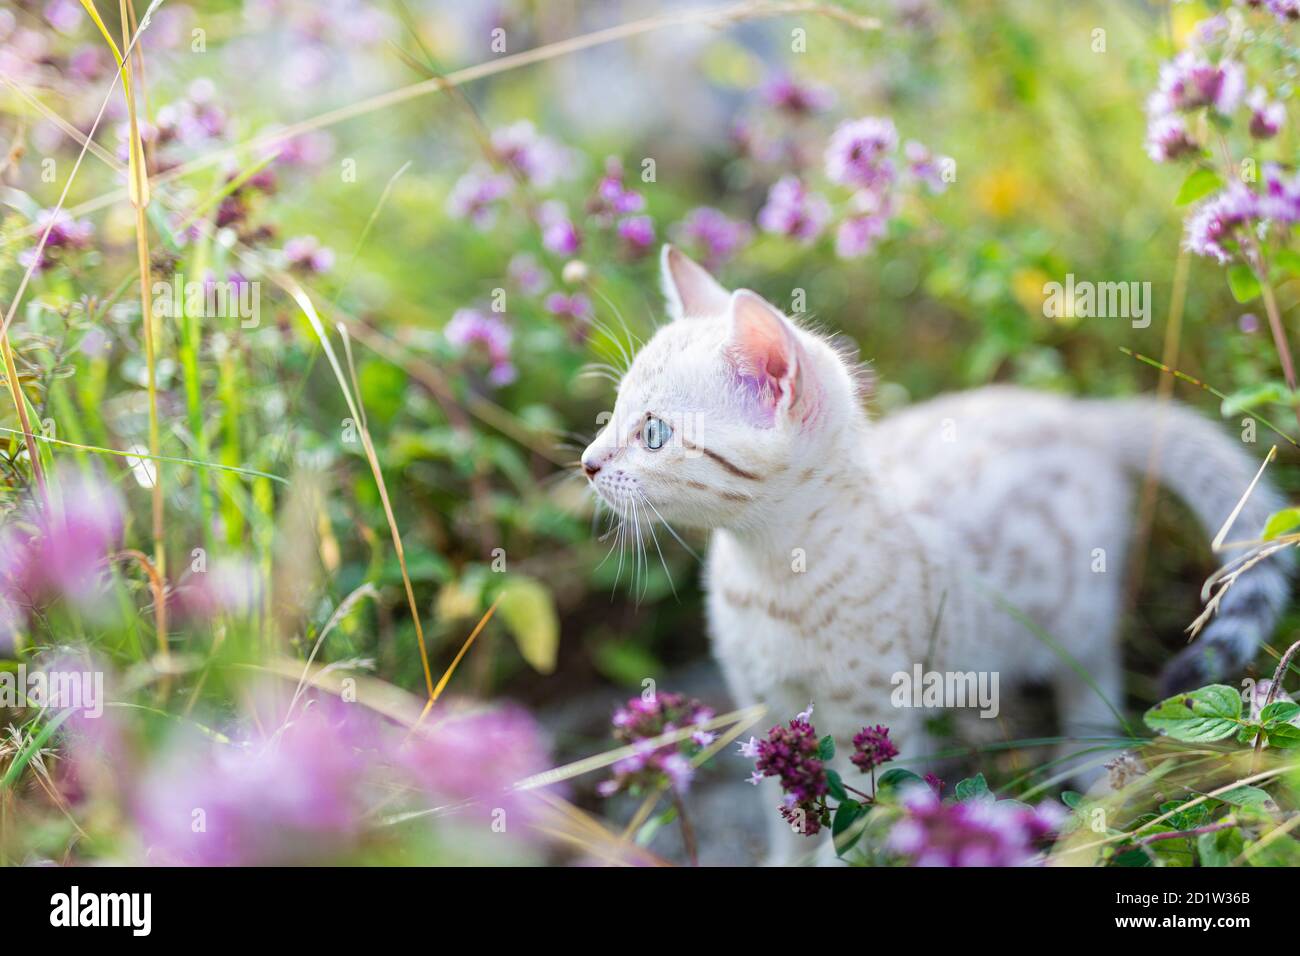 A cute white little Snow Bengal kitten outdoors surrounded by purple flowers, oregano herb. The curious little cat is 7 weeks old. The cat is centered Stock Photo